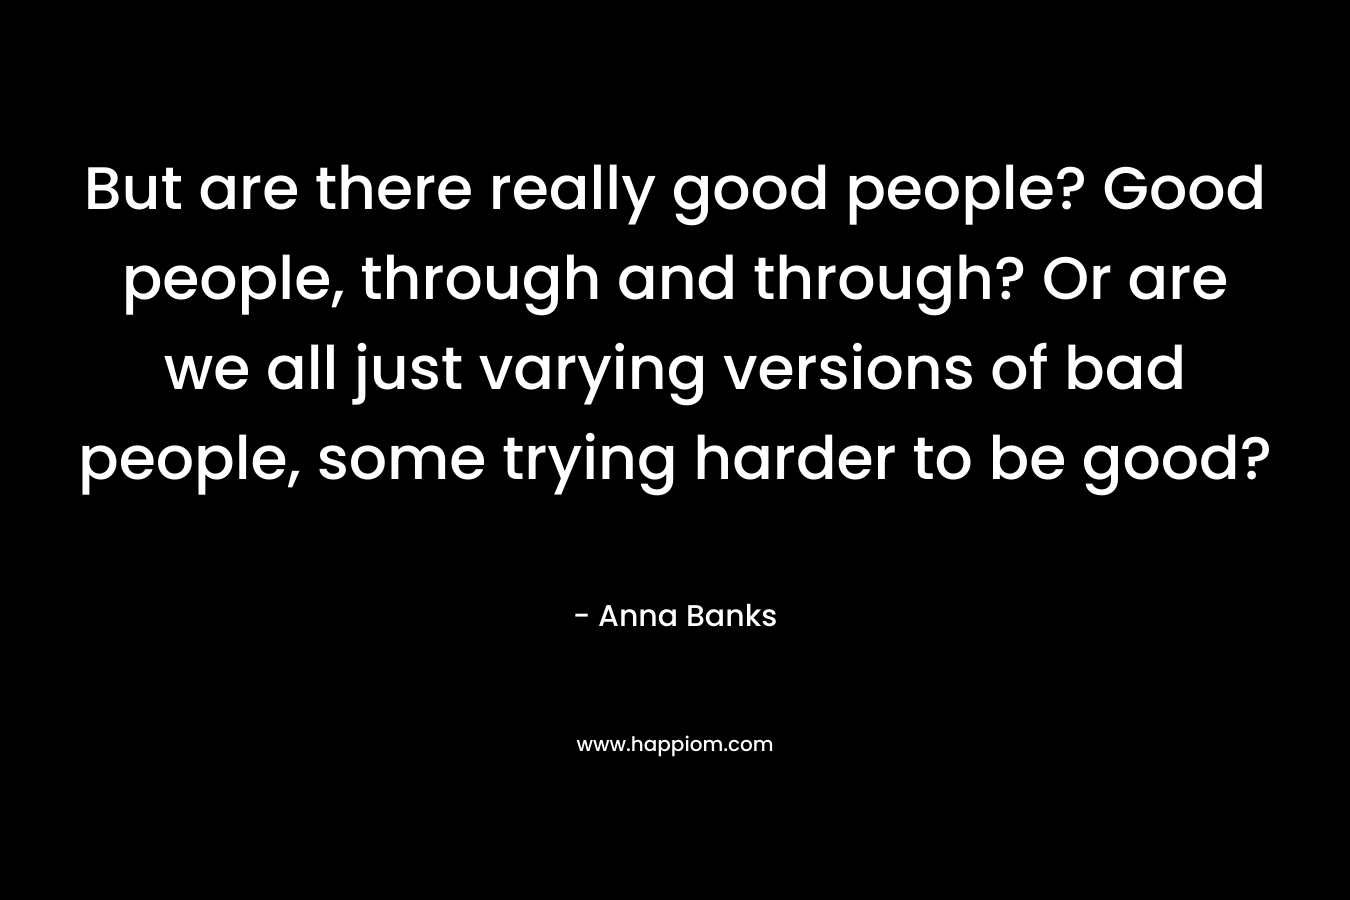 But are there really good people? Good people, through and through? Or are we all just varying versions of bad people, some trying harder to be good? – Anna Banks